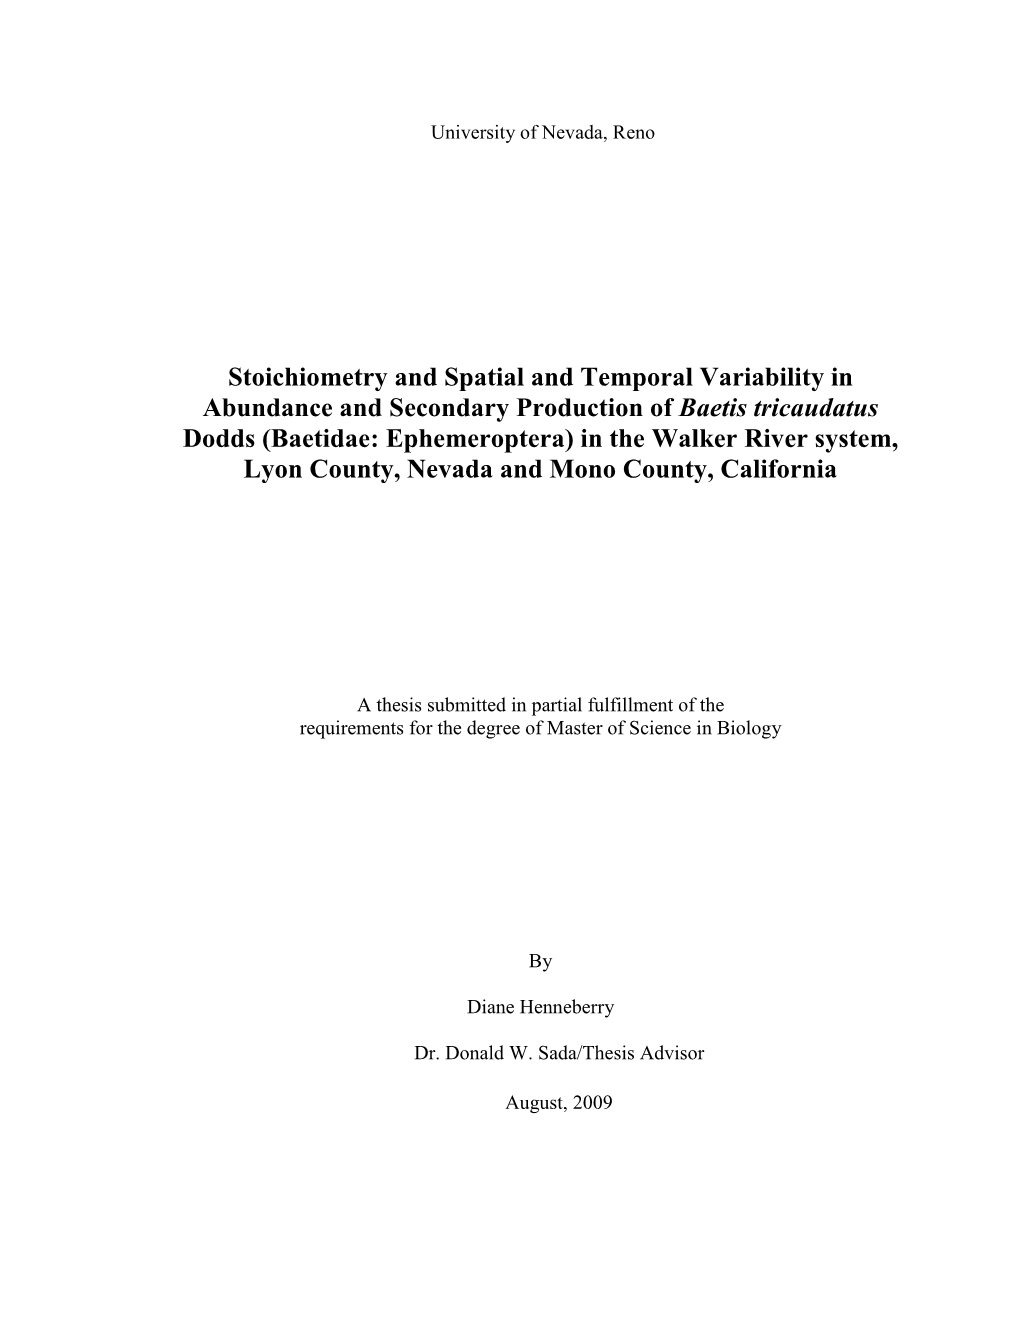 Stoichiometry and Spatial and Temporal Variability in Abundance